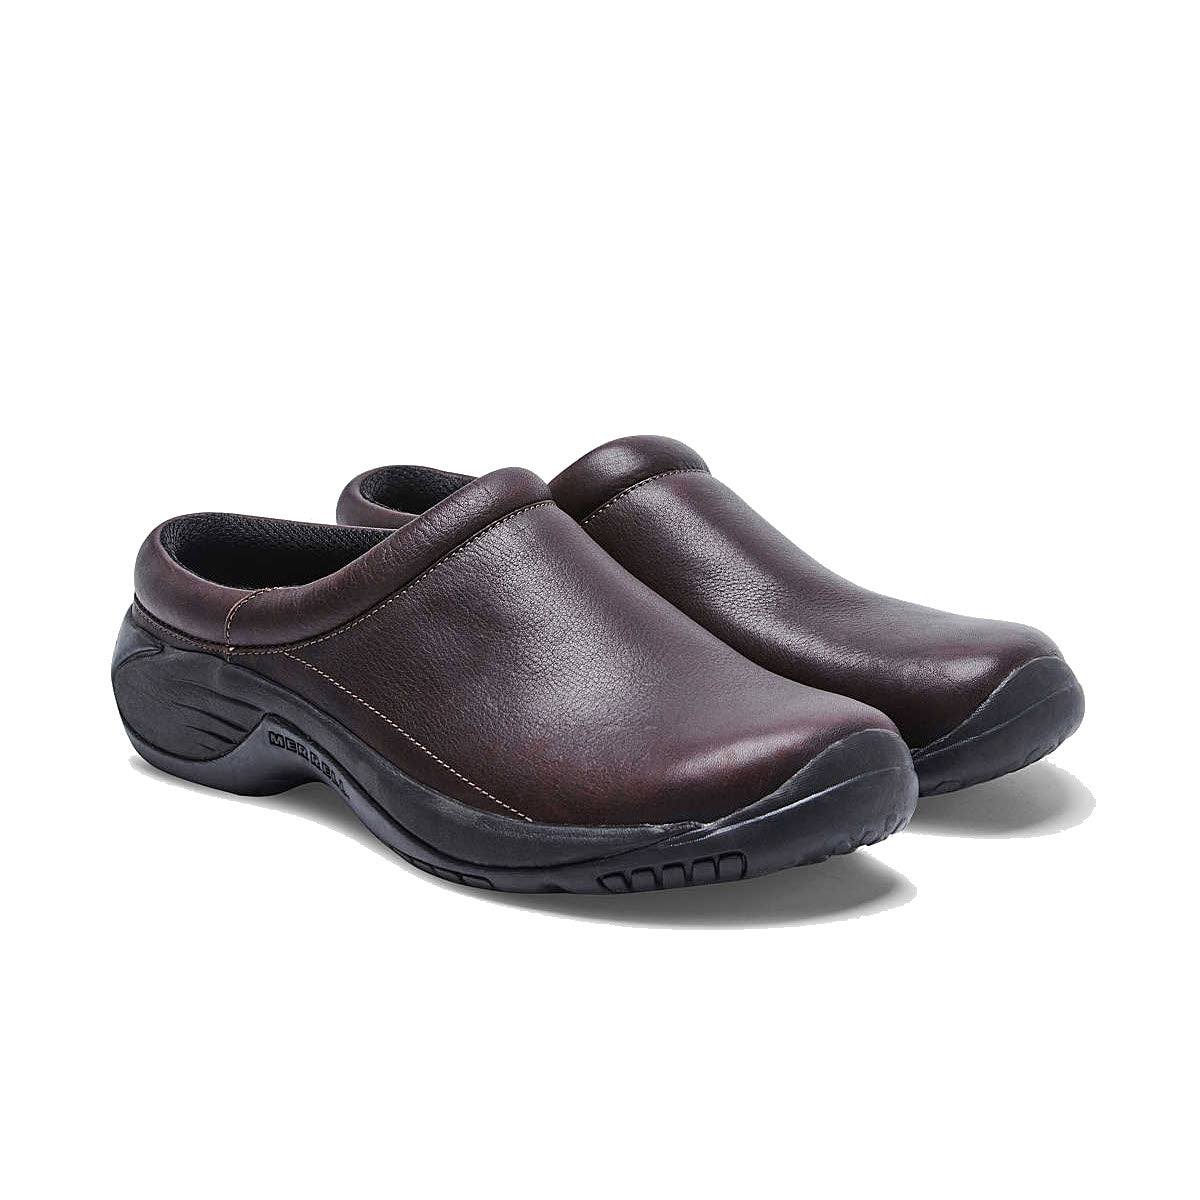 A pair of Merrell Encore Gust 2 Espresso Smooth slip-on shoes with black soles, displayed on a white background.